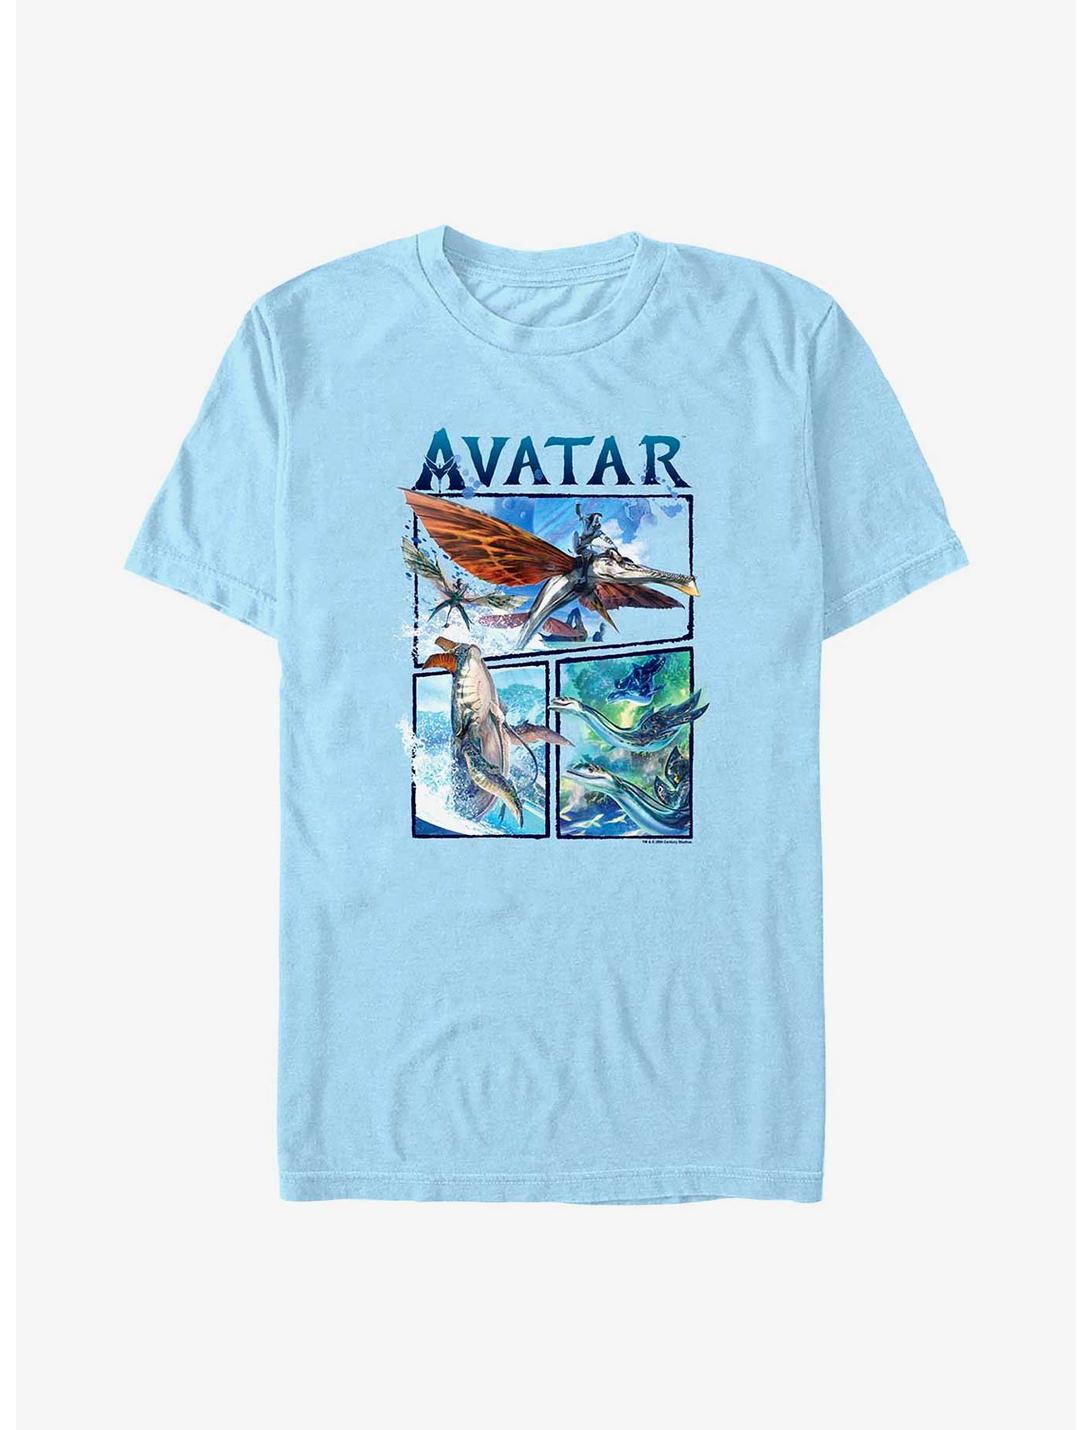 Avatar: The Way of Water Air and Sea Extra Soft T-Shirt, LT BLUE, hi-res